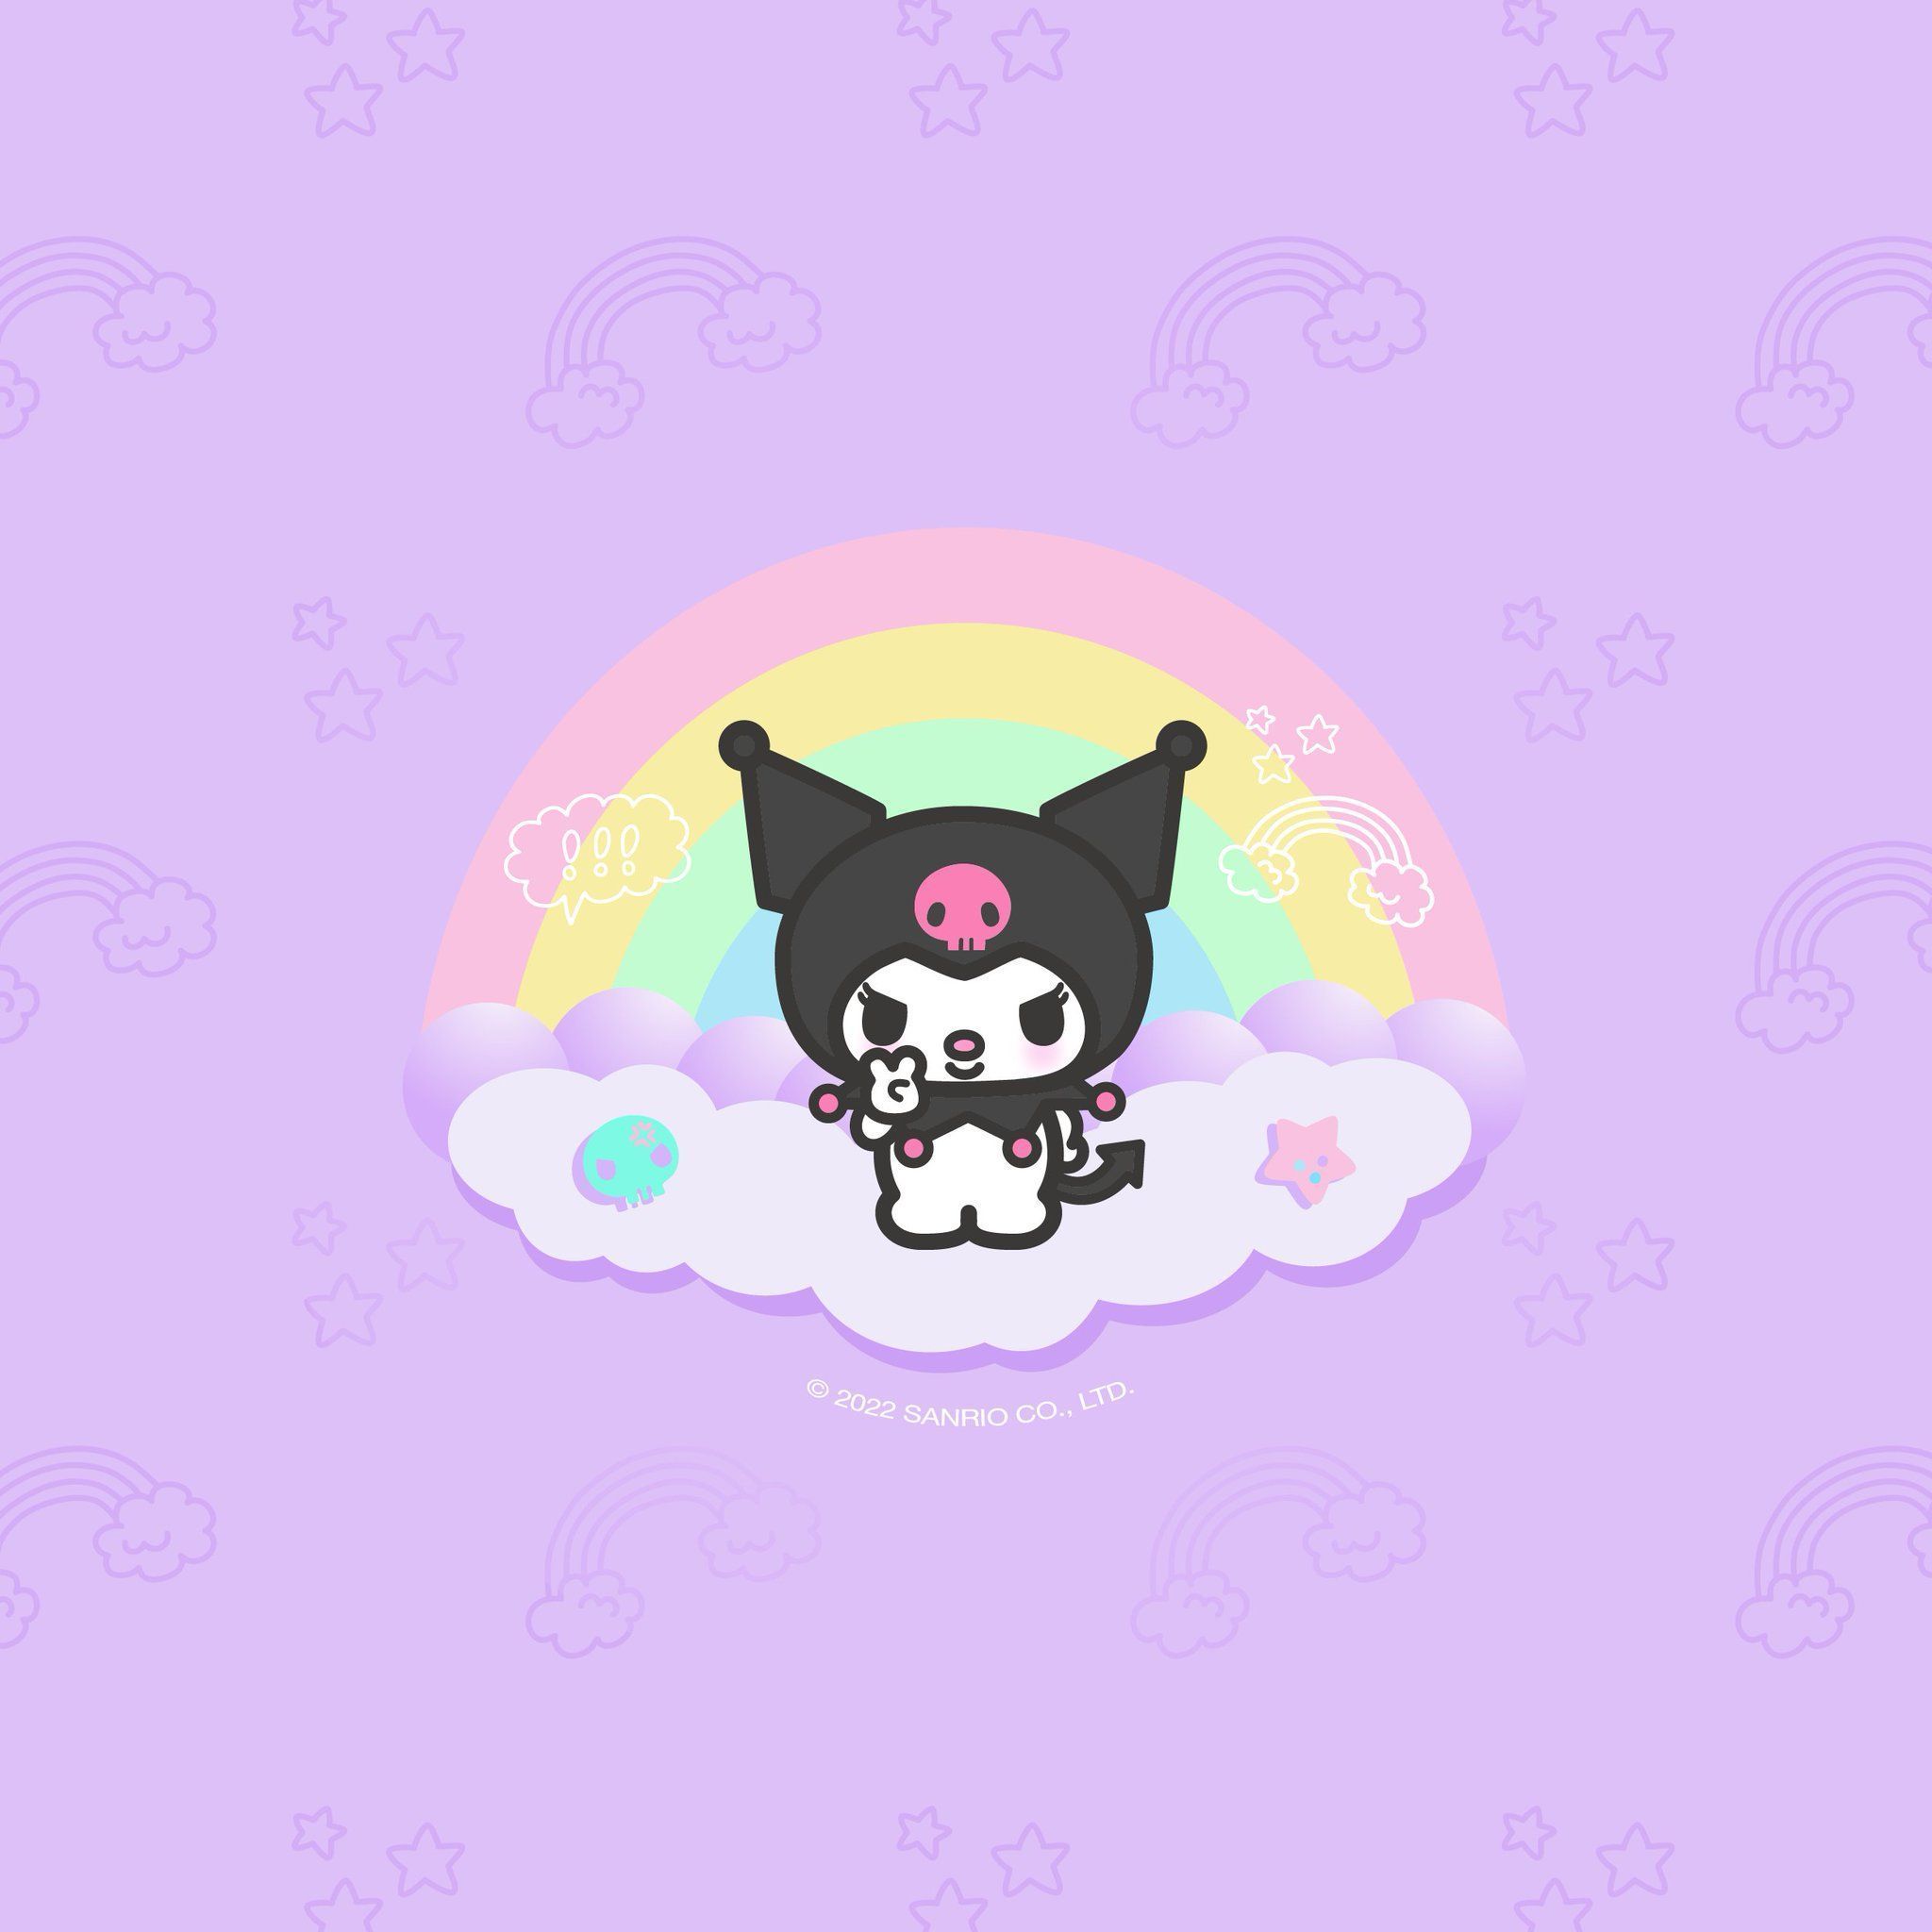 Kuromi sitting on a cloud with a rainbow behind her - Sanrio, My Melody, Kuromi